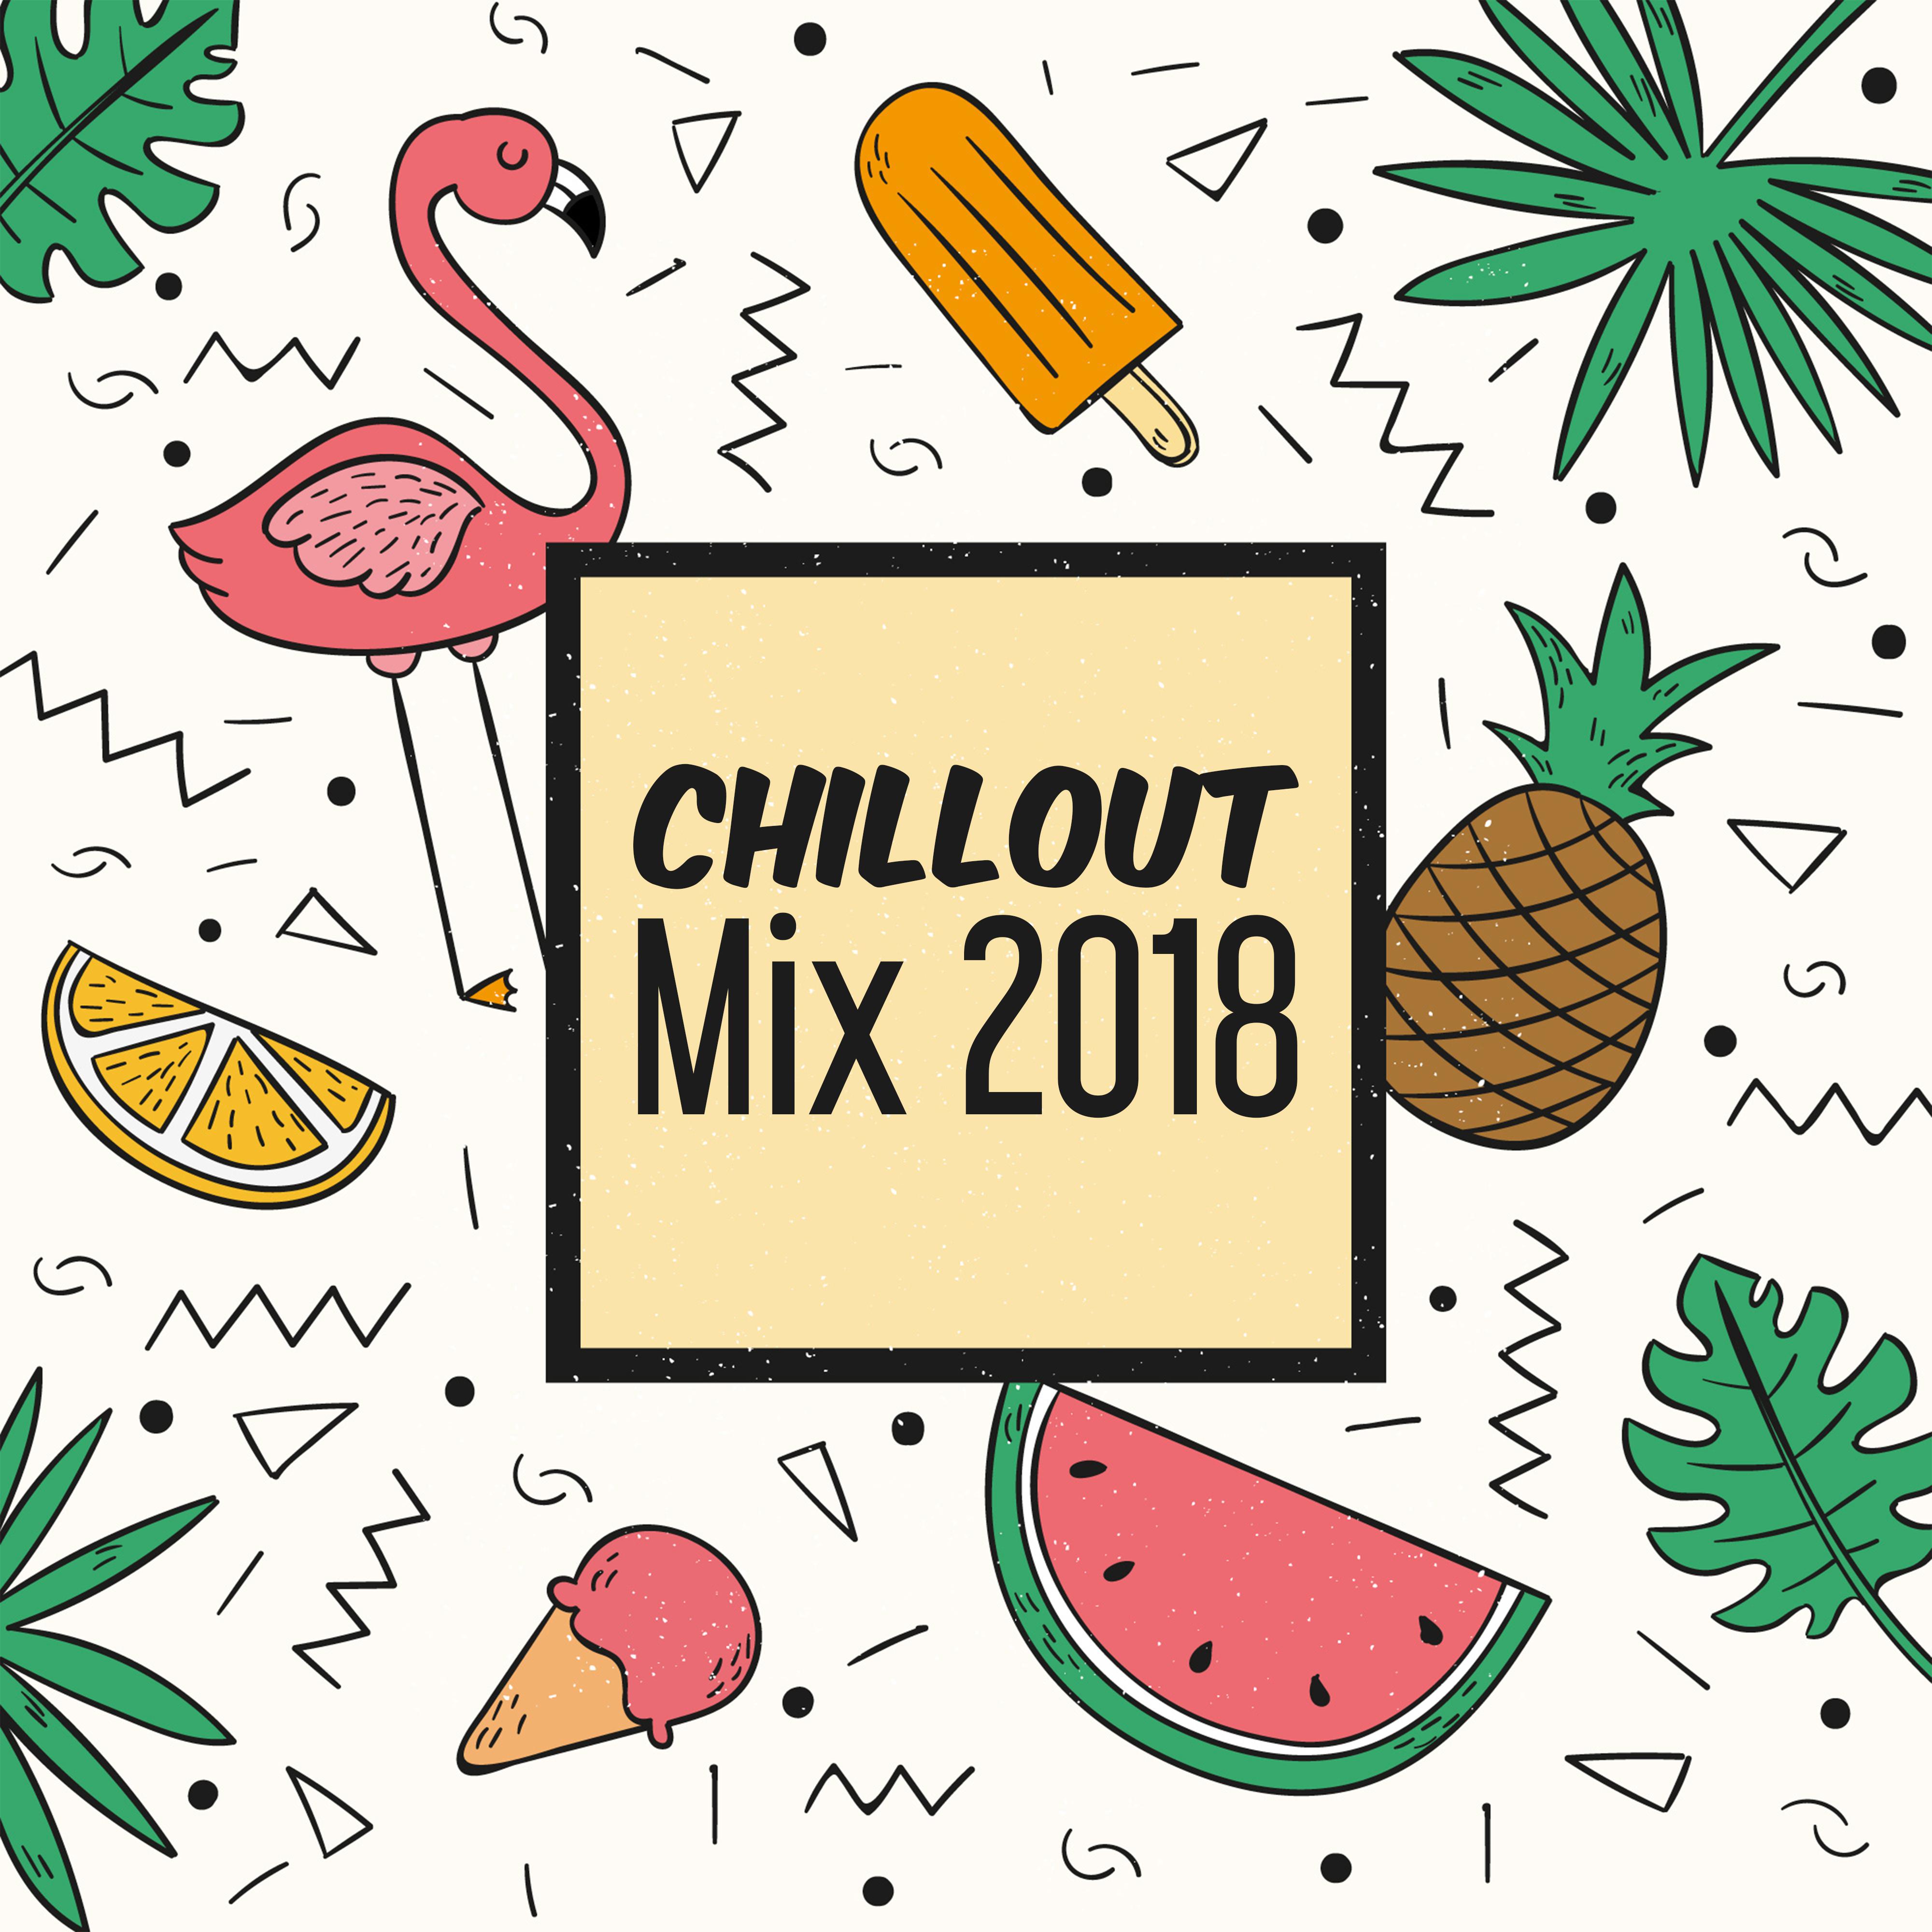 Chillout Mix 2018